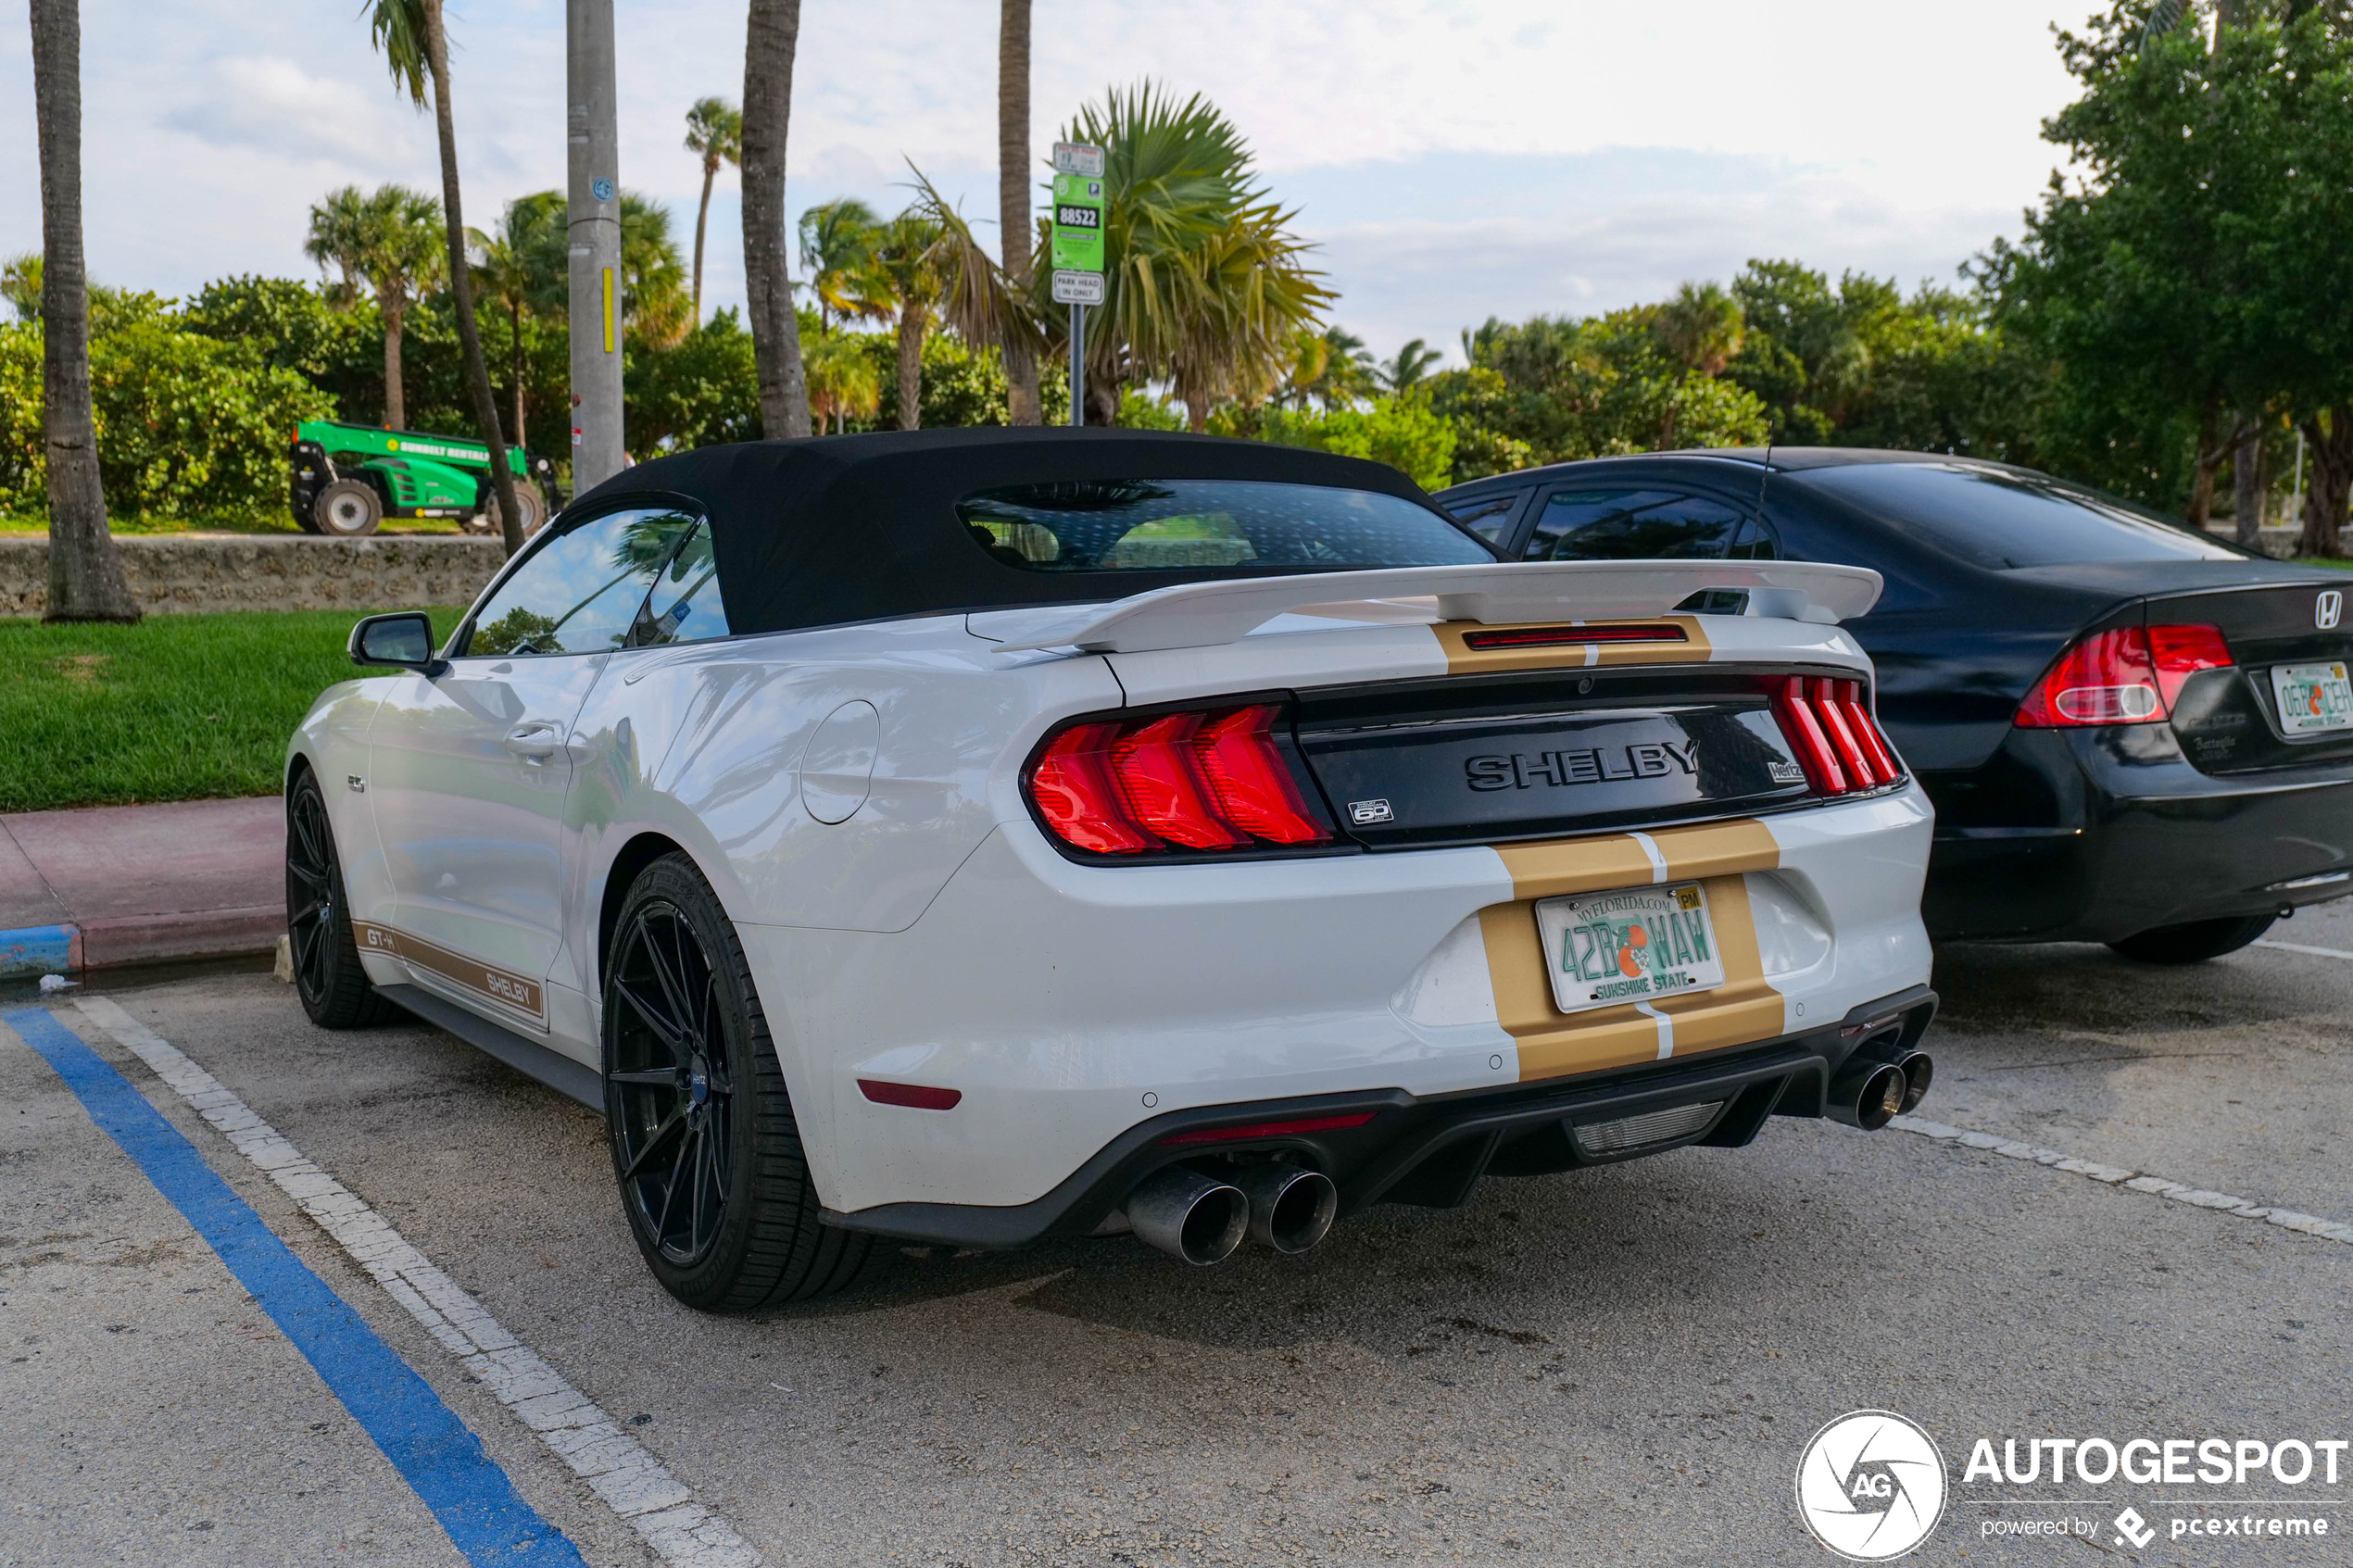 Ford Mustang Shelby GT-H 2018 Convertible